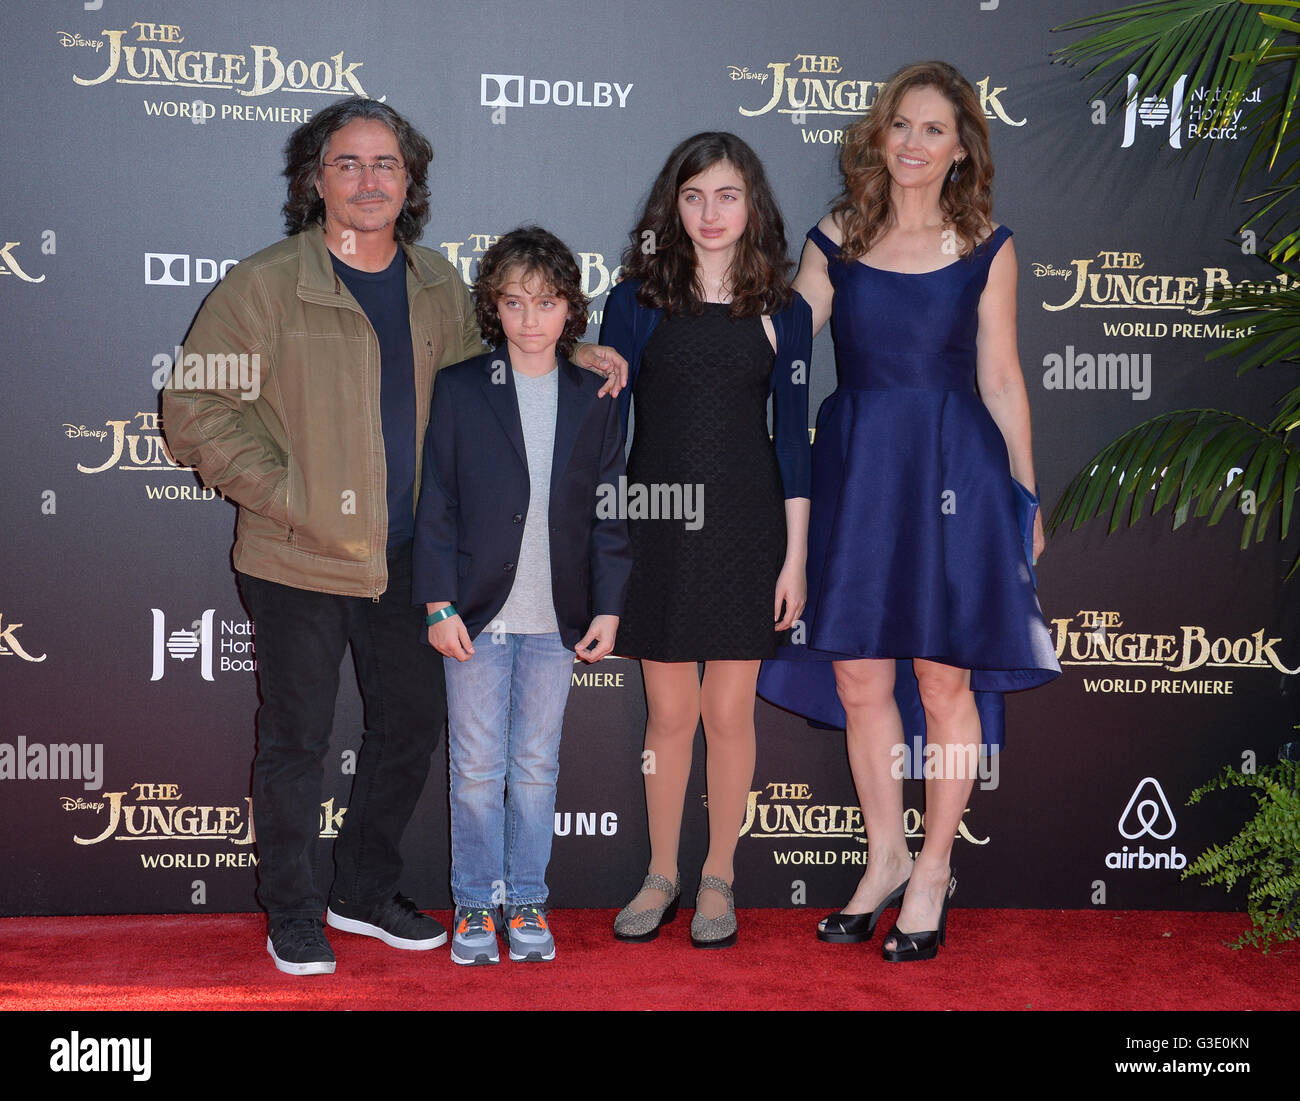 LOS ANGELES, CA. April 4, 2016. Actress Amy Brenneman & husband Brad Silberling & children at the world premiere of 'The Jungle Book' at the El Capitan Theatre, Hollywood. Stock Photo